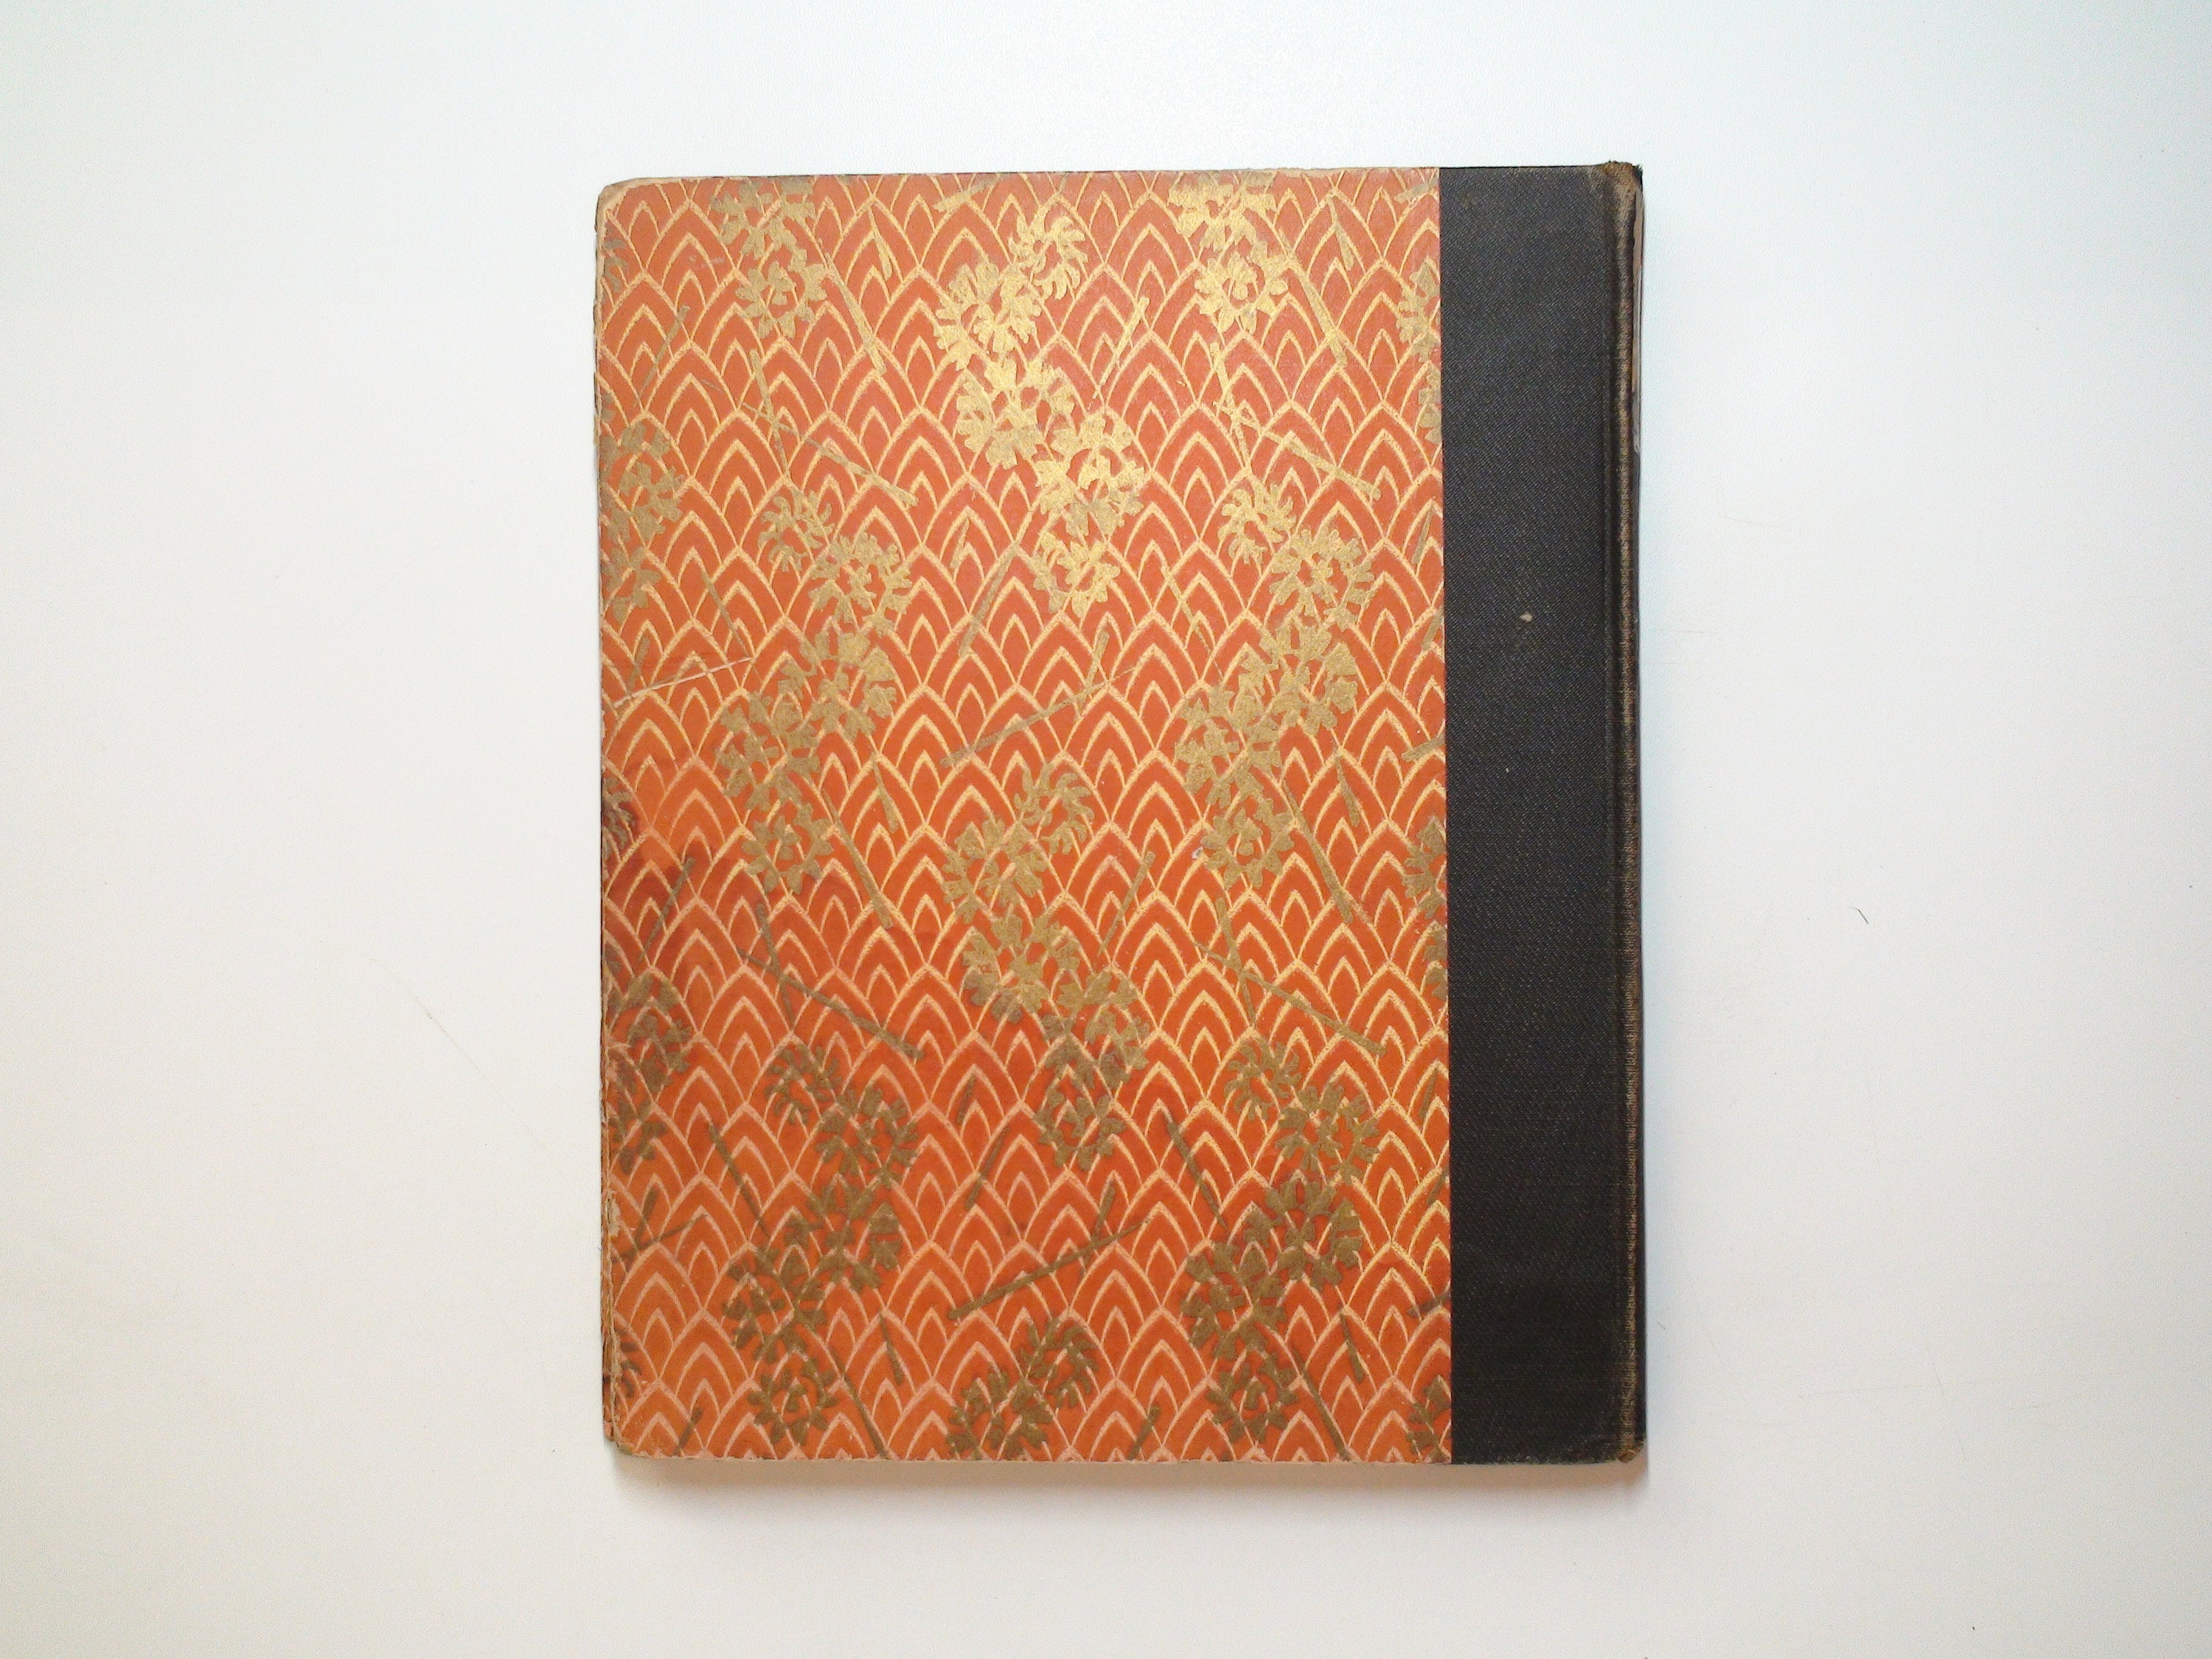 A Guide to Caper, by Thomas Bodkin, Illustrated by Denis Eden, 1st Ed, 1924